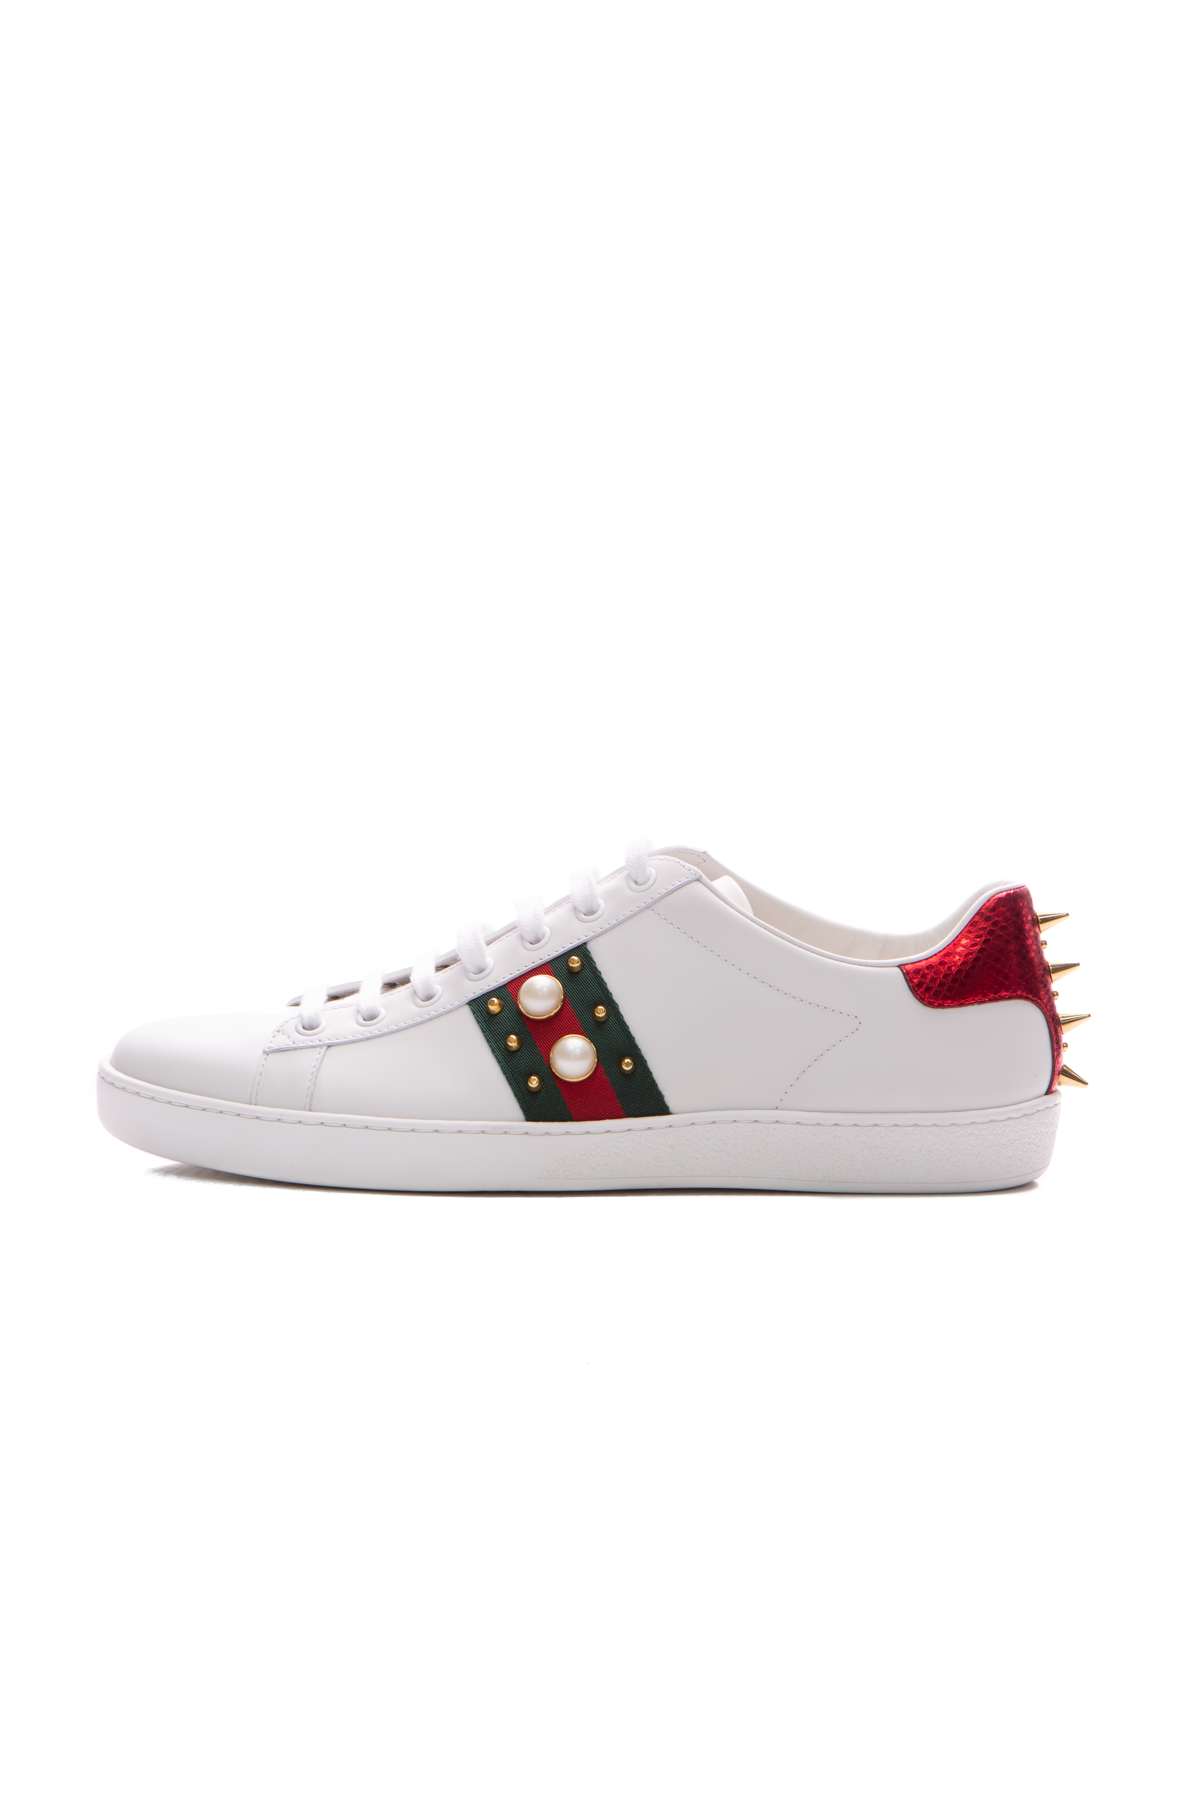 Pearl Stud Ace Sneakers - Size 41.5